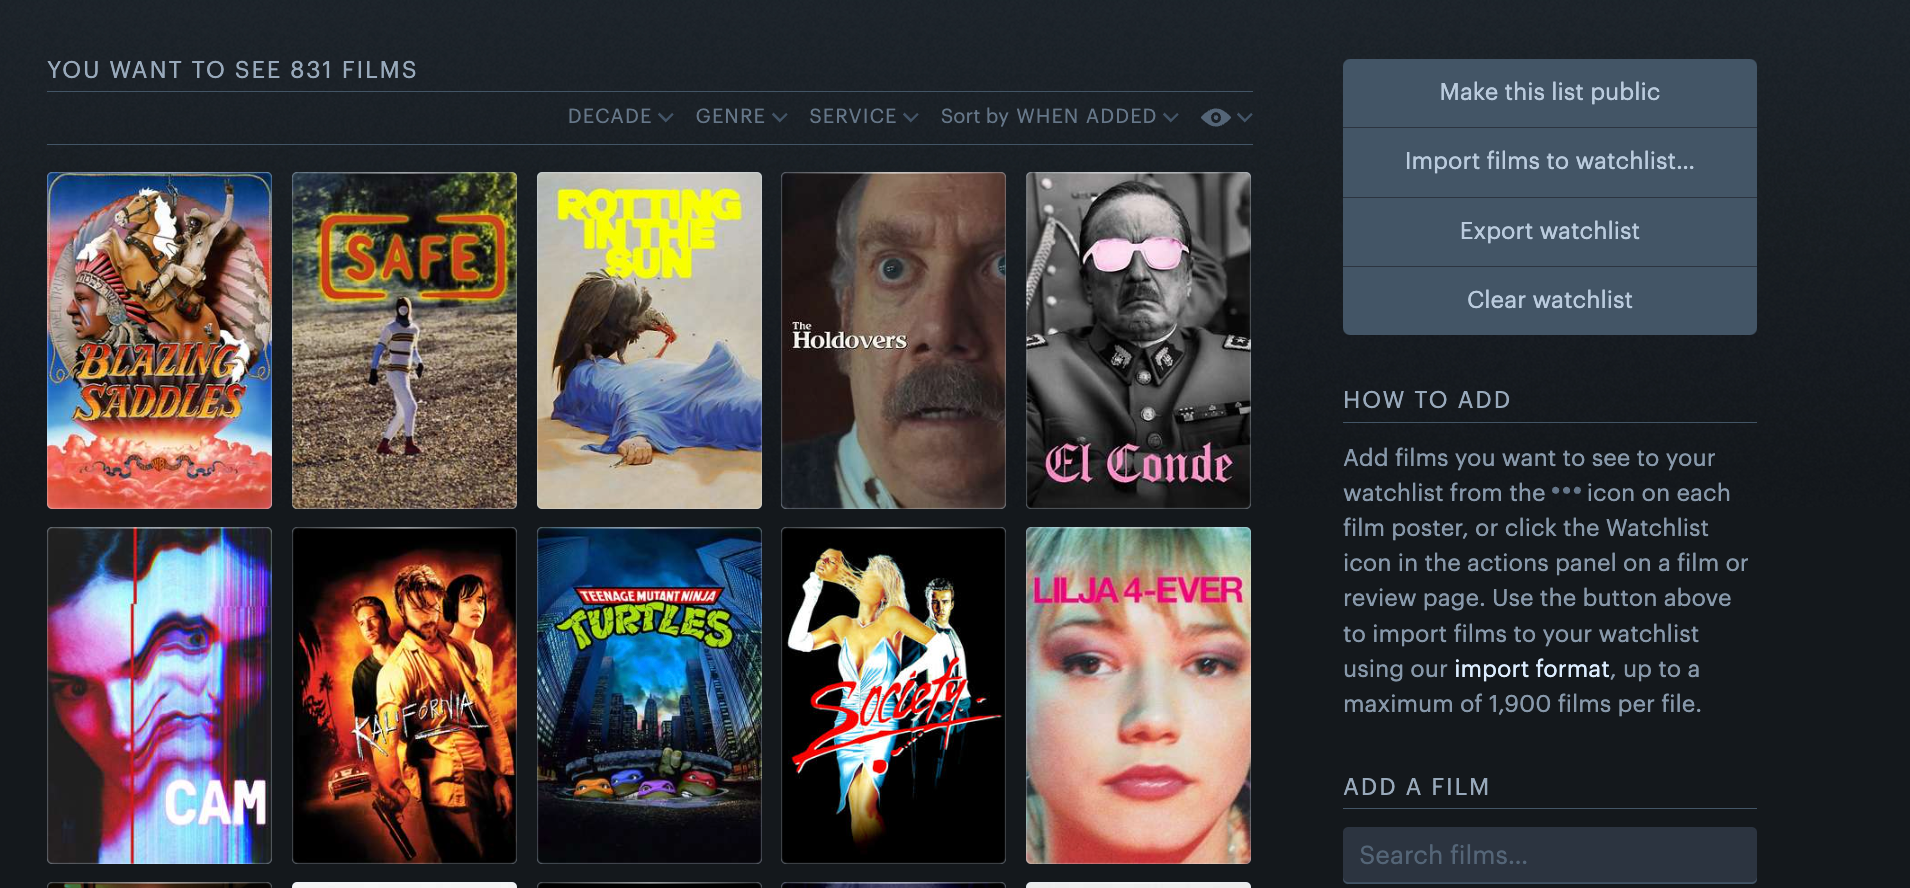 Film Site Letterboxd Sold to Investment Firm – The Hollywood Reporter